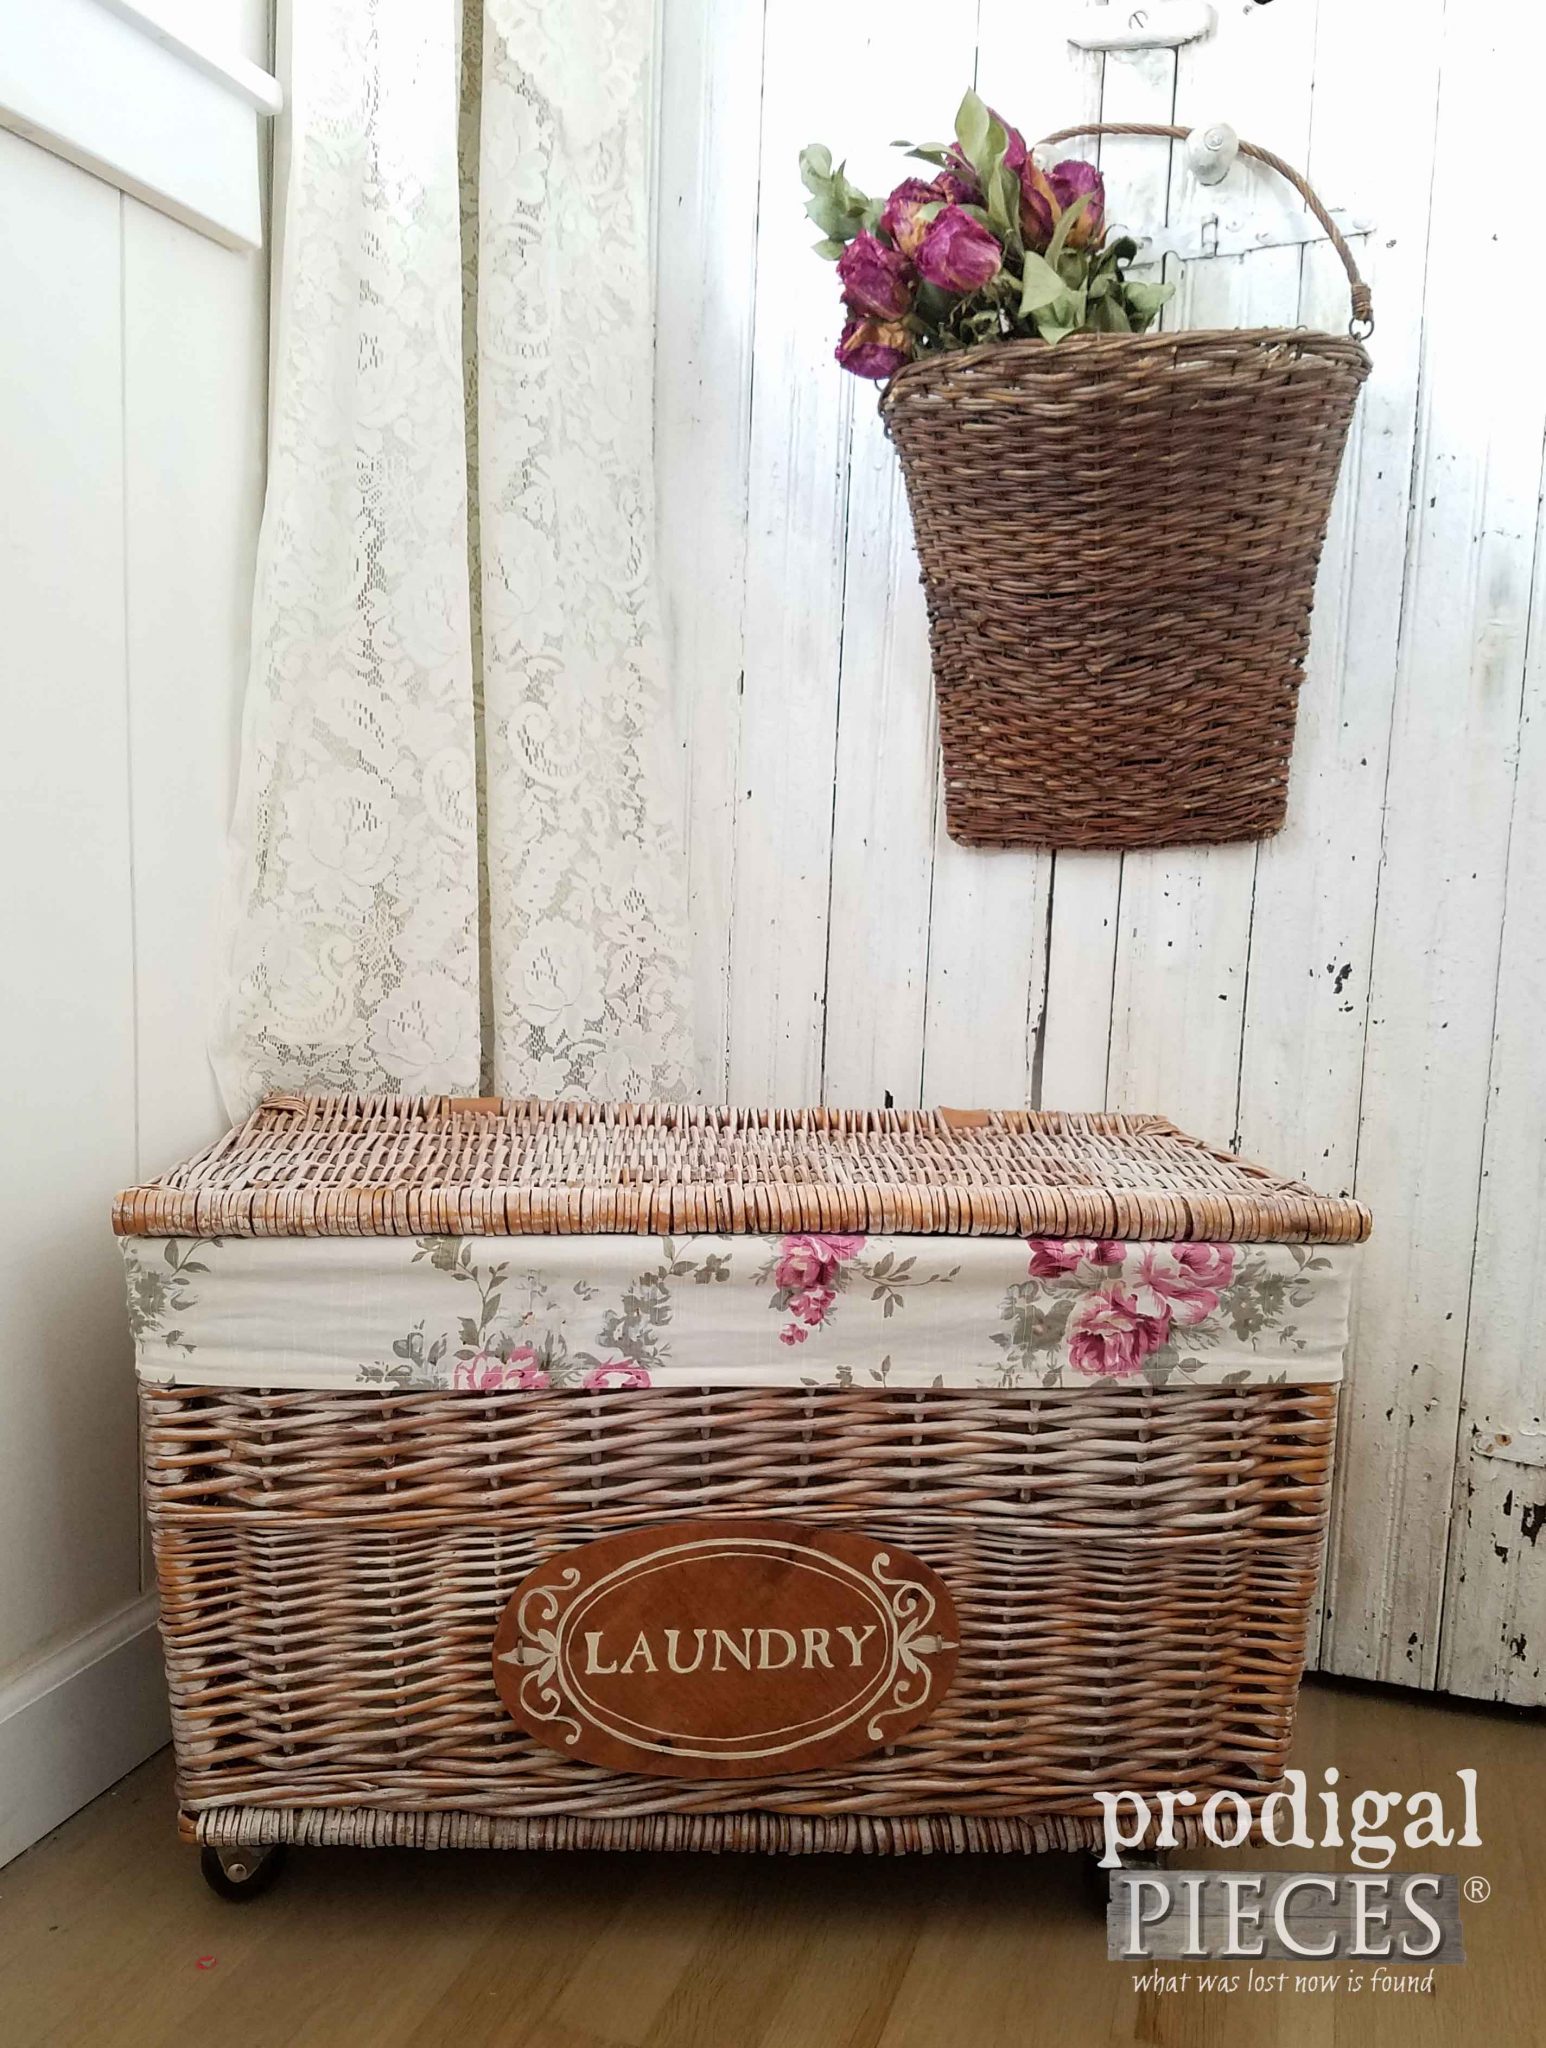 Farmhouse Laundry Cart complete with DIY steps by Prodigal Pieces | prodigalpieces.com